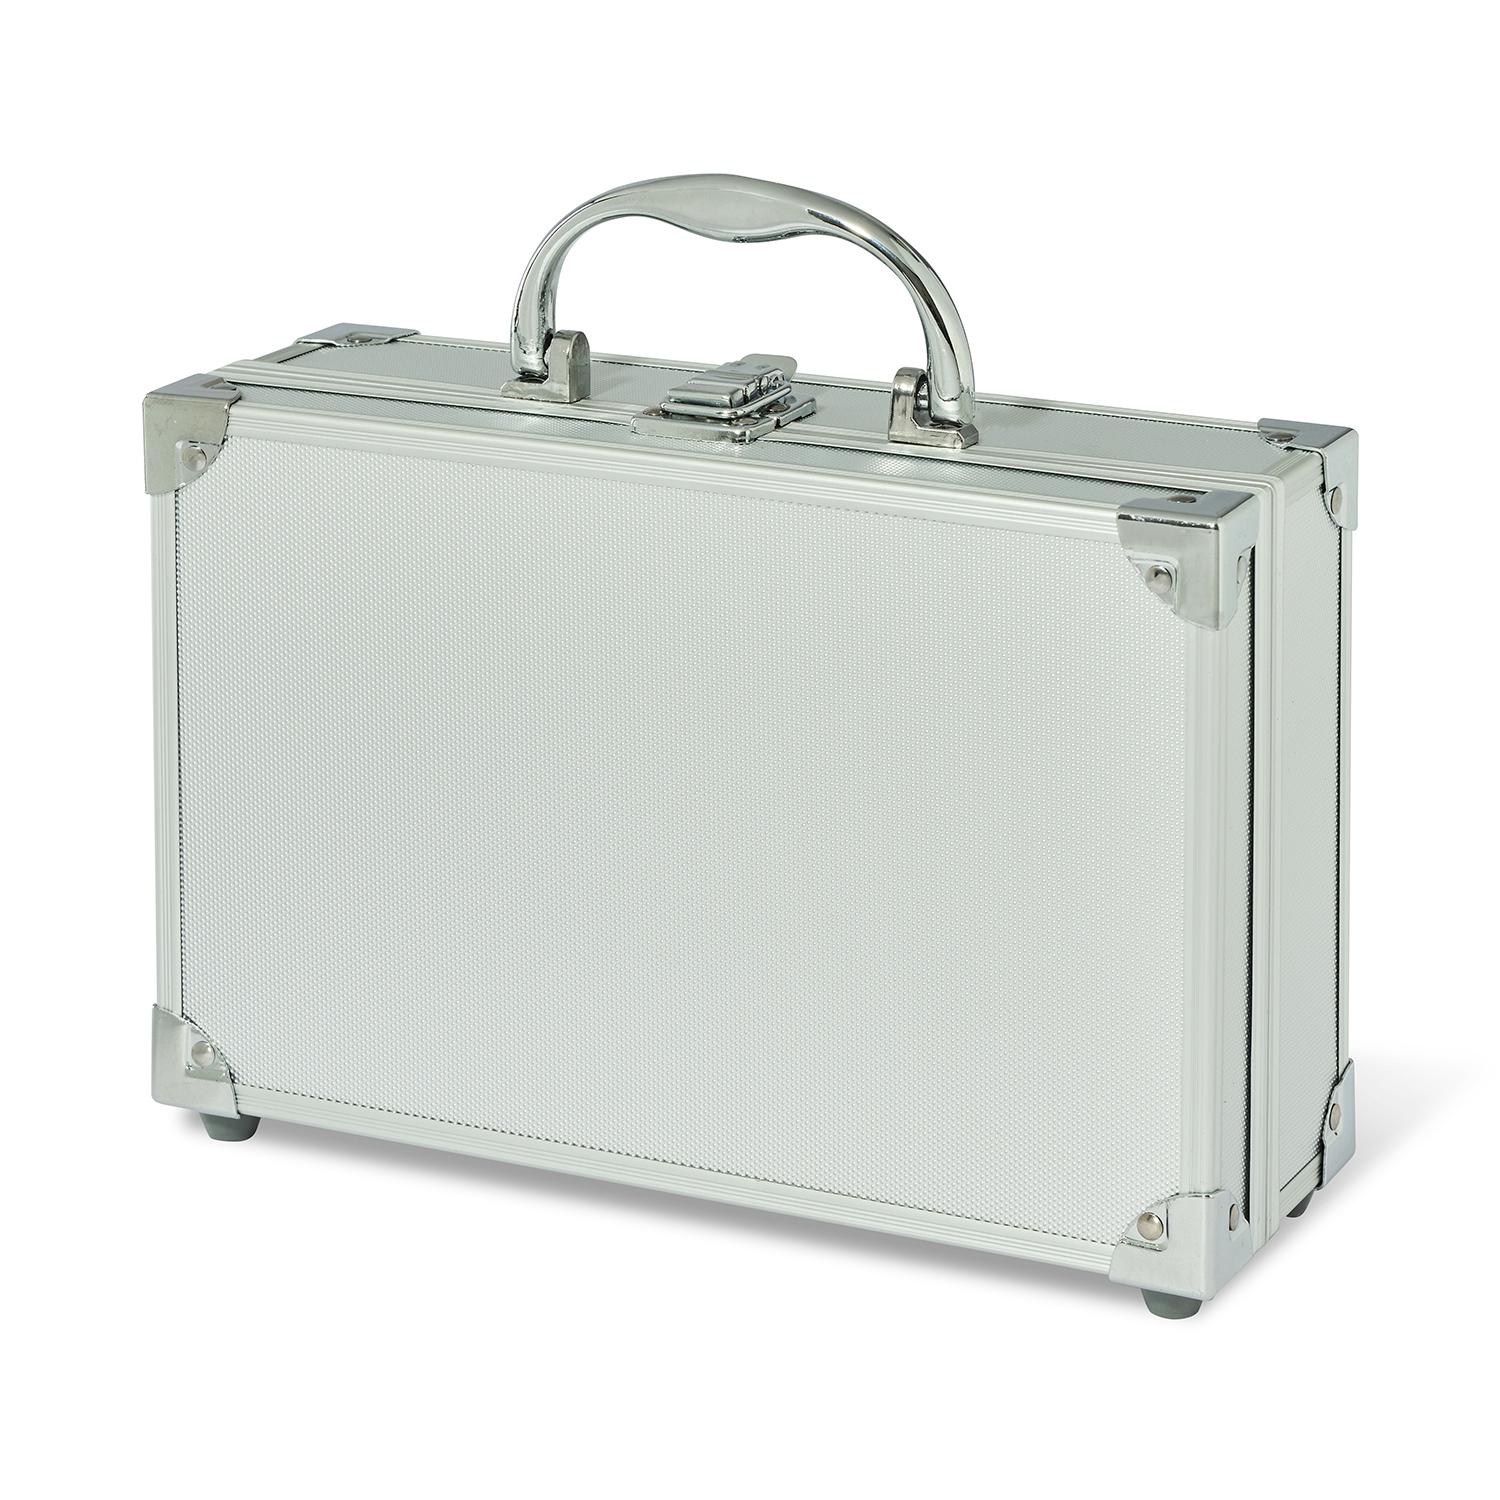 Perfect traveller case